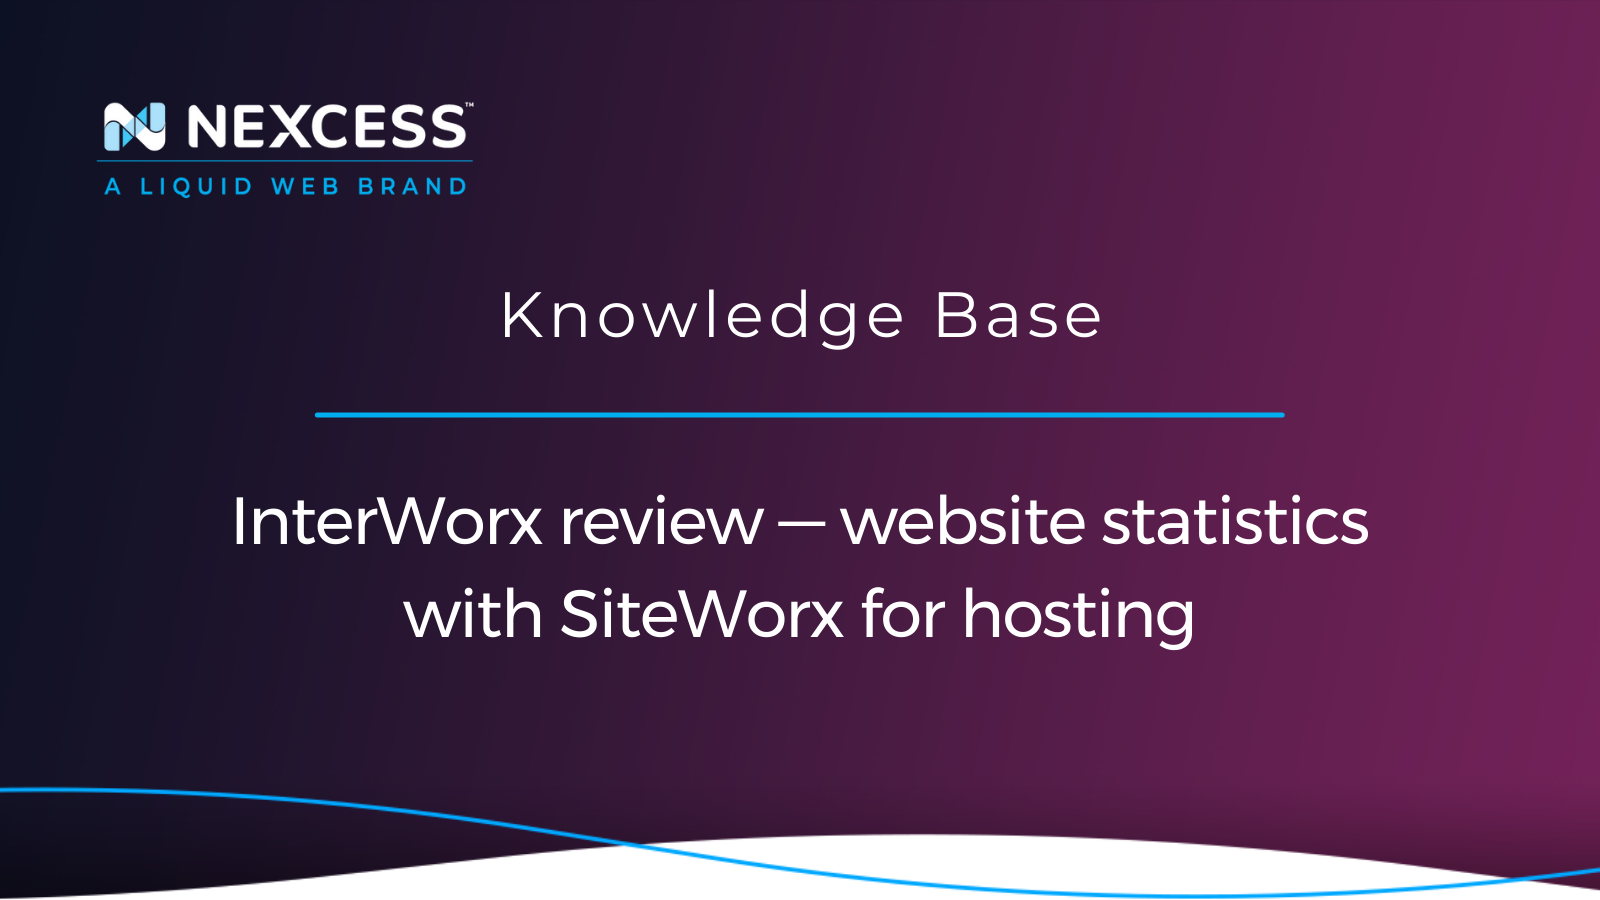 InterWorx review — website statistics with SiteWorx for hosting